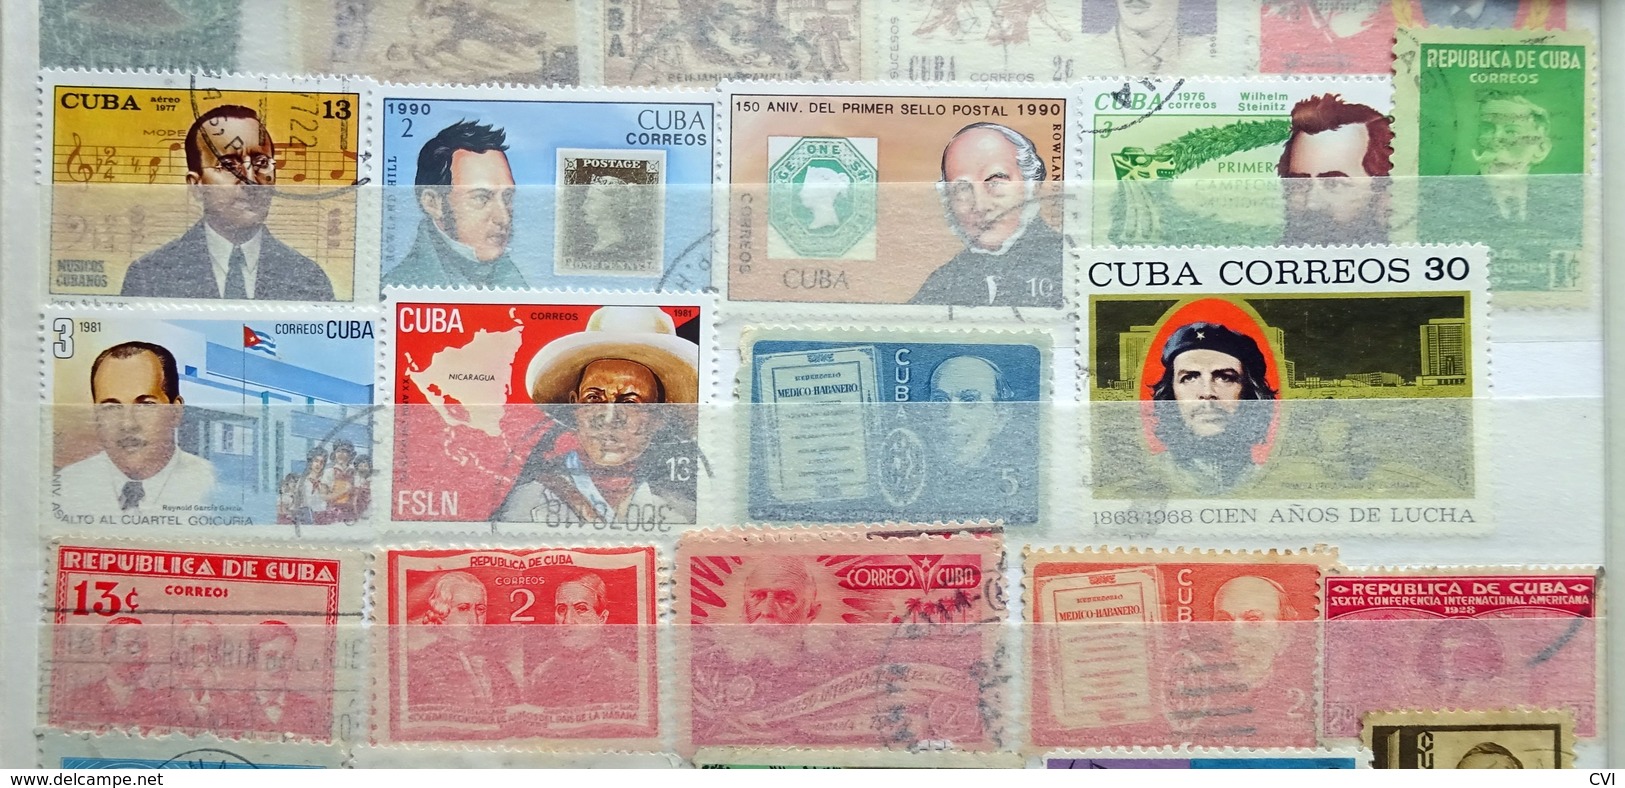 Cuba early to modern in Stockbook, Revenues, Airmail, Animals, Sports, Birds, Flowers, Butterflies, Trains, Thematic.